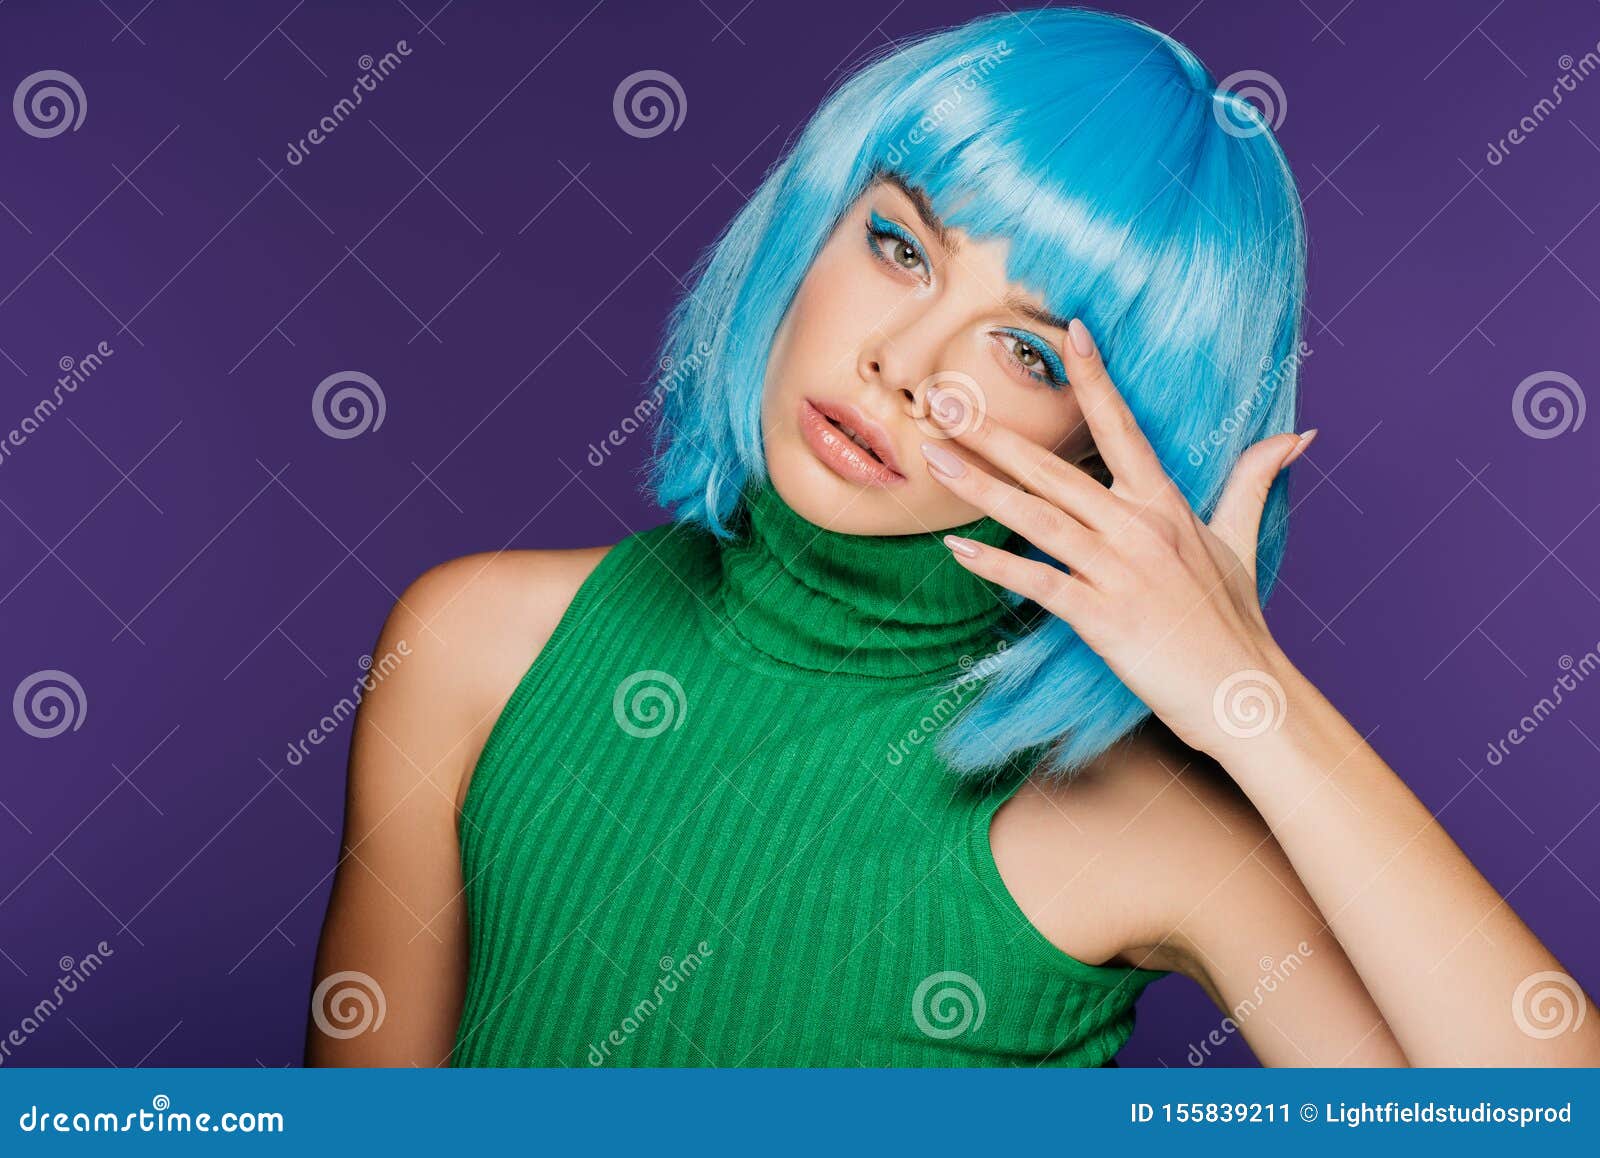 Girl with blue hair posing - wide 4